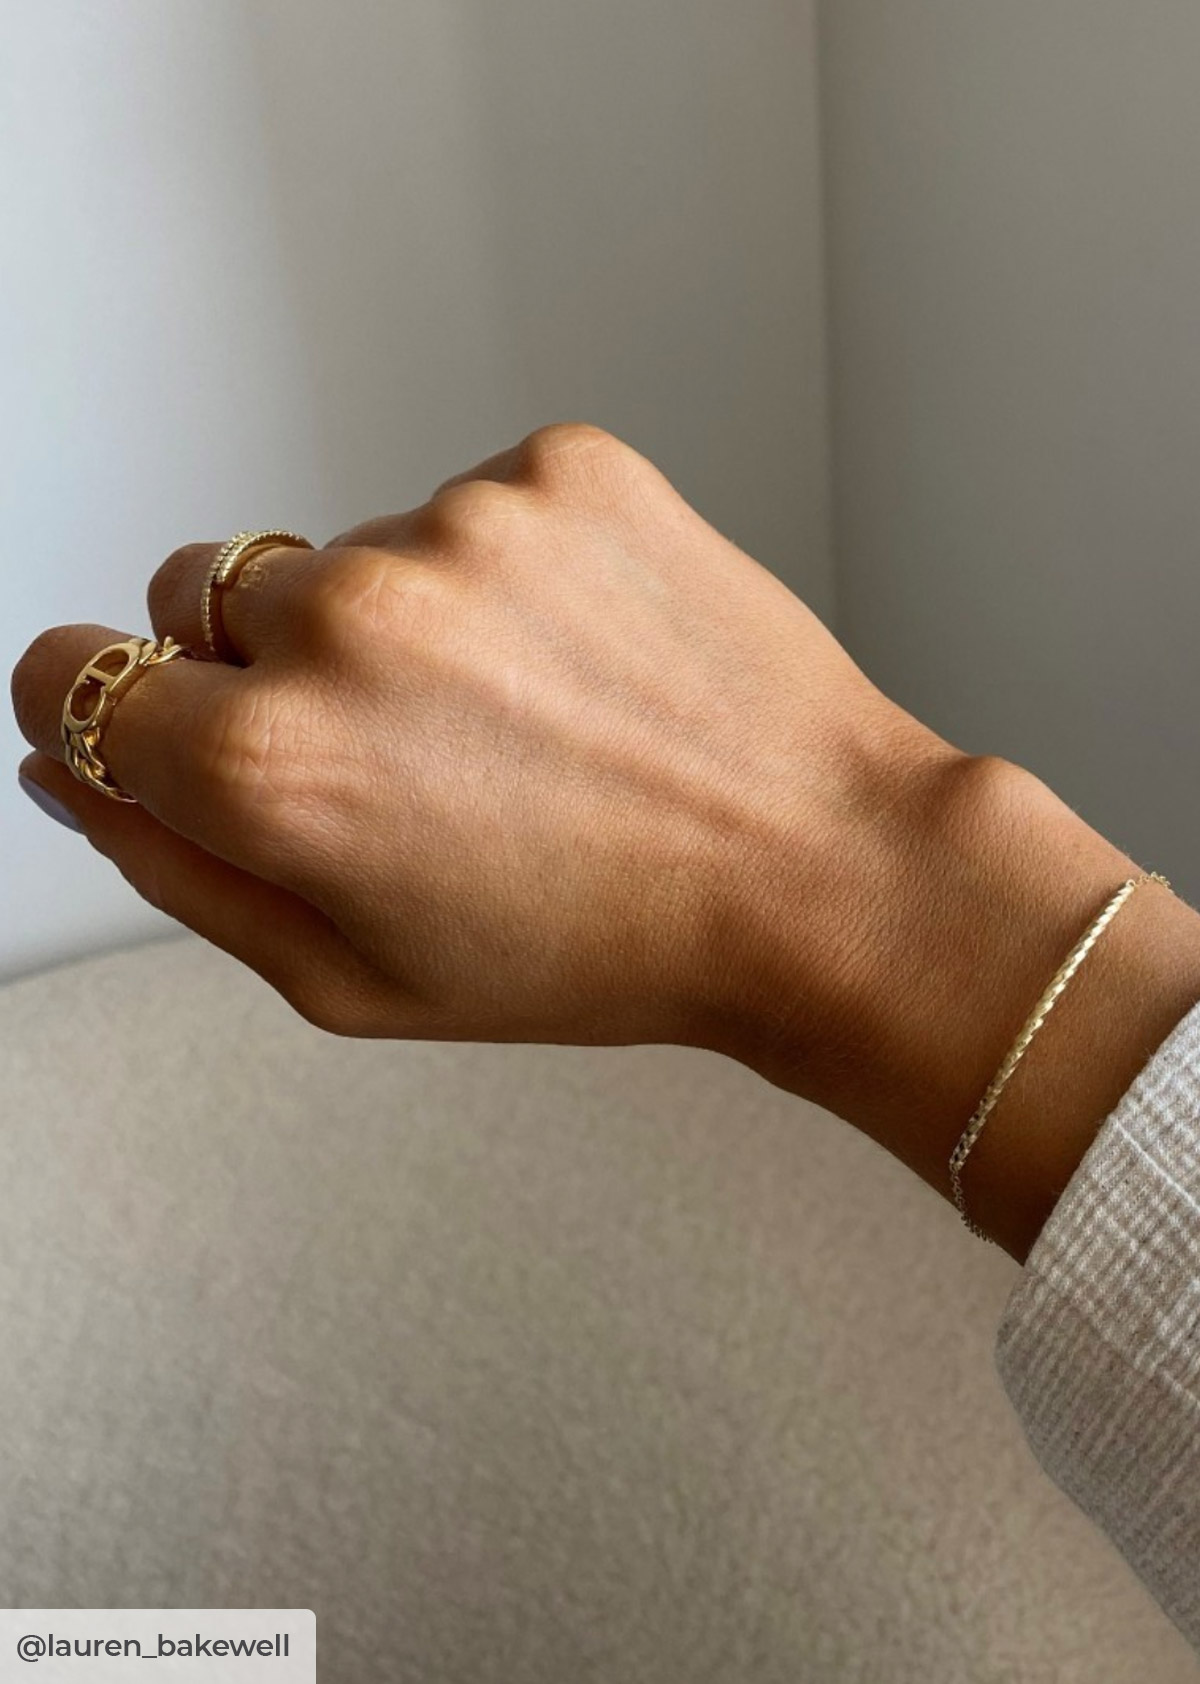 Breaking The Rules: How To Mix Gold and Silver Jewelry